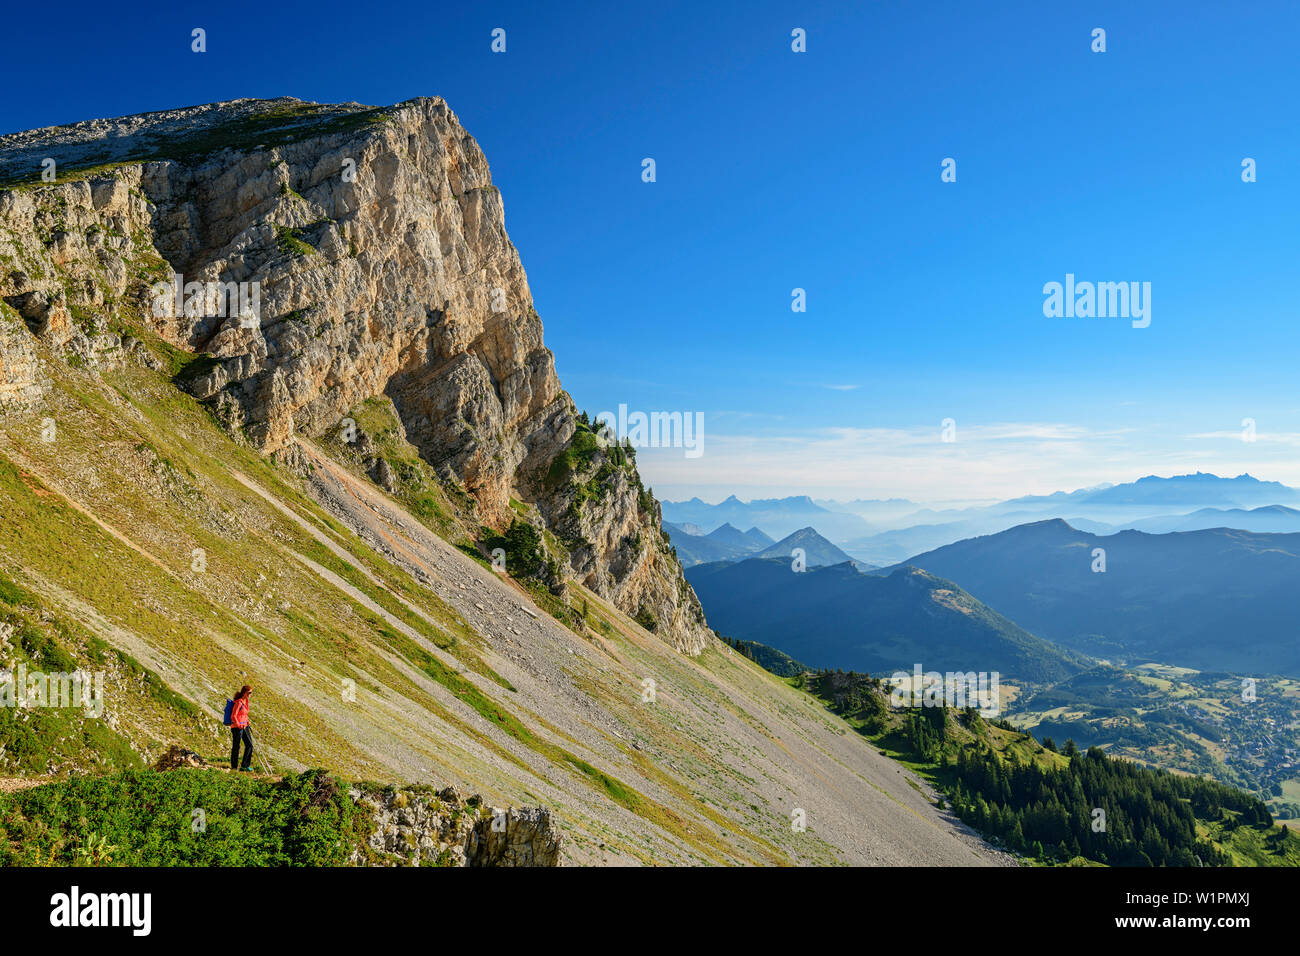 Woman while hiking Enjoy the views, from the Grand Veymont, Vercors, Dauphine, Dauphine, Isère, France Stock Photo